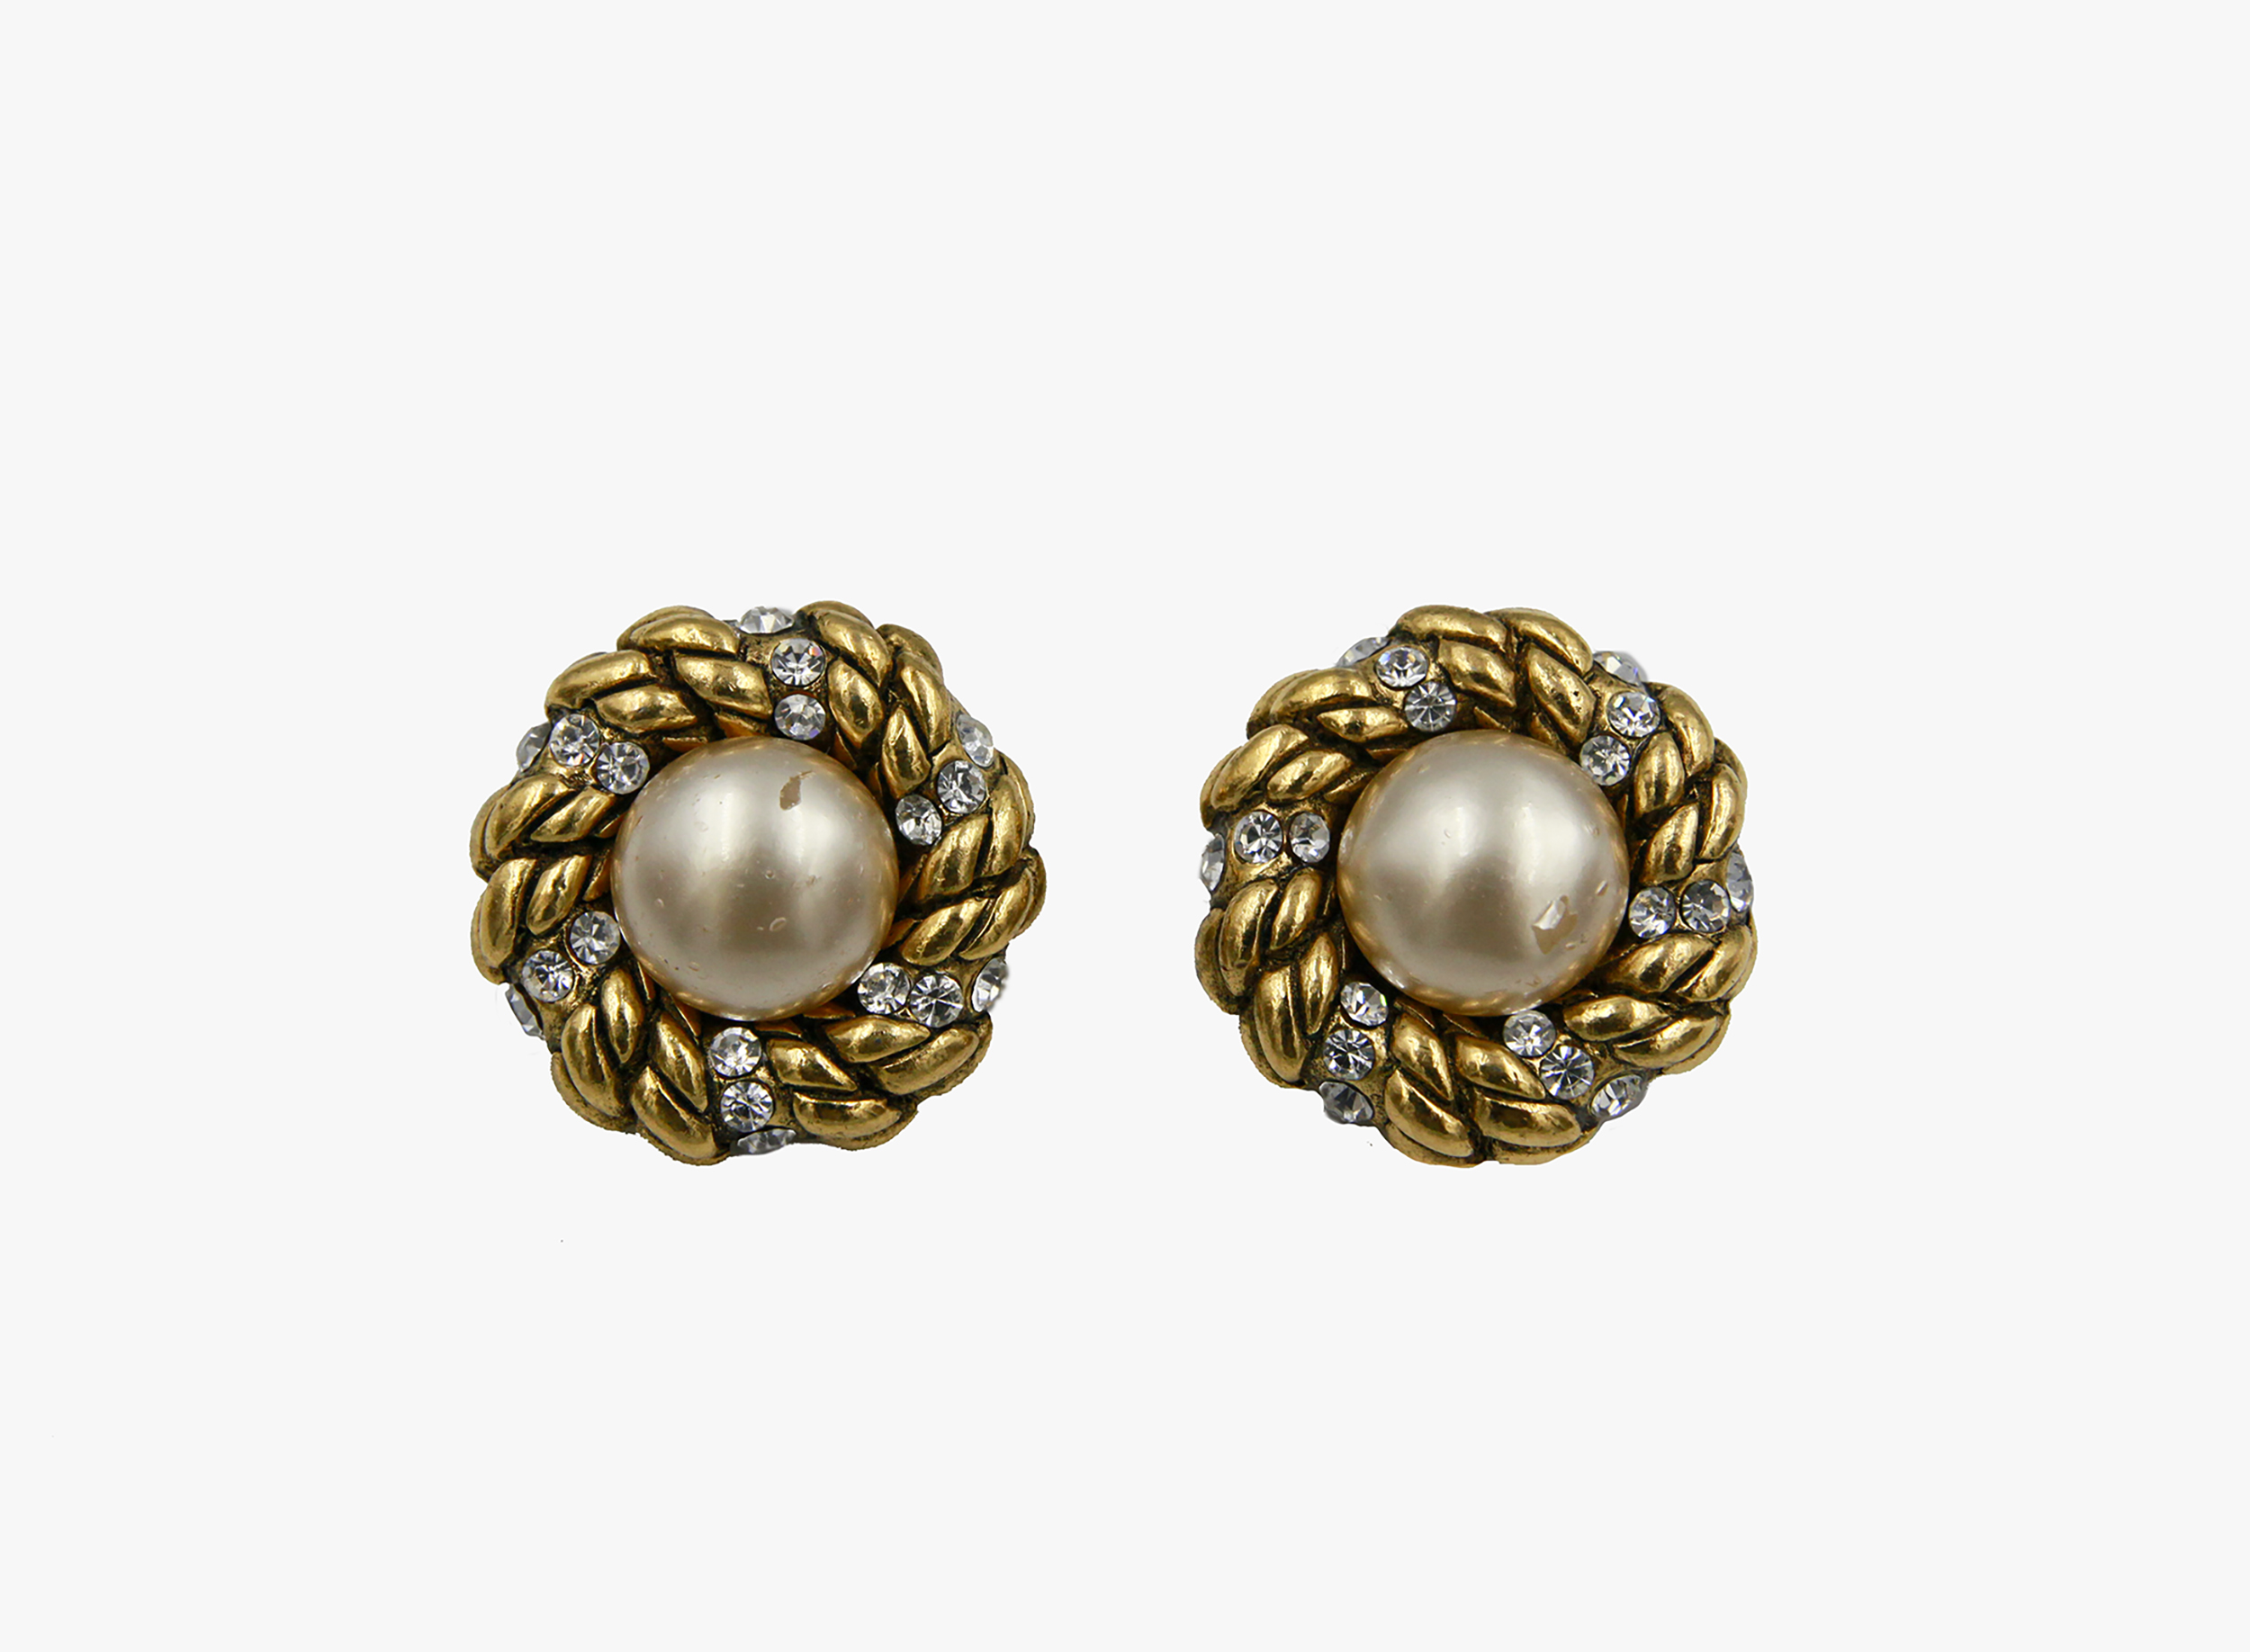 Chanel Vintage Faux Pearl&Crystal Clip-On Earrings,1984 buy for 550$ -  MANHATTAN'S BABE